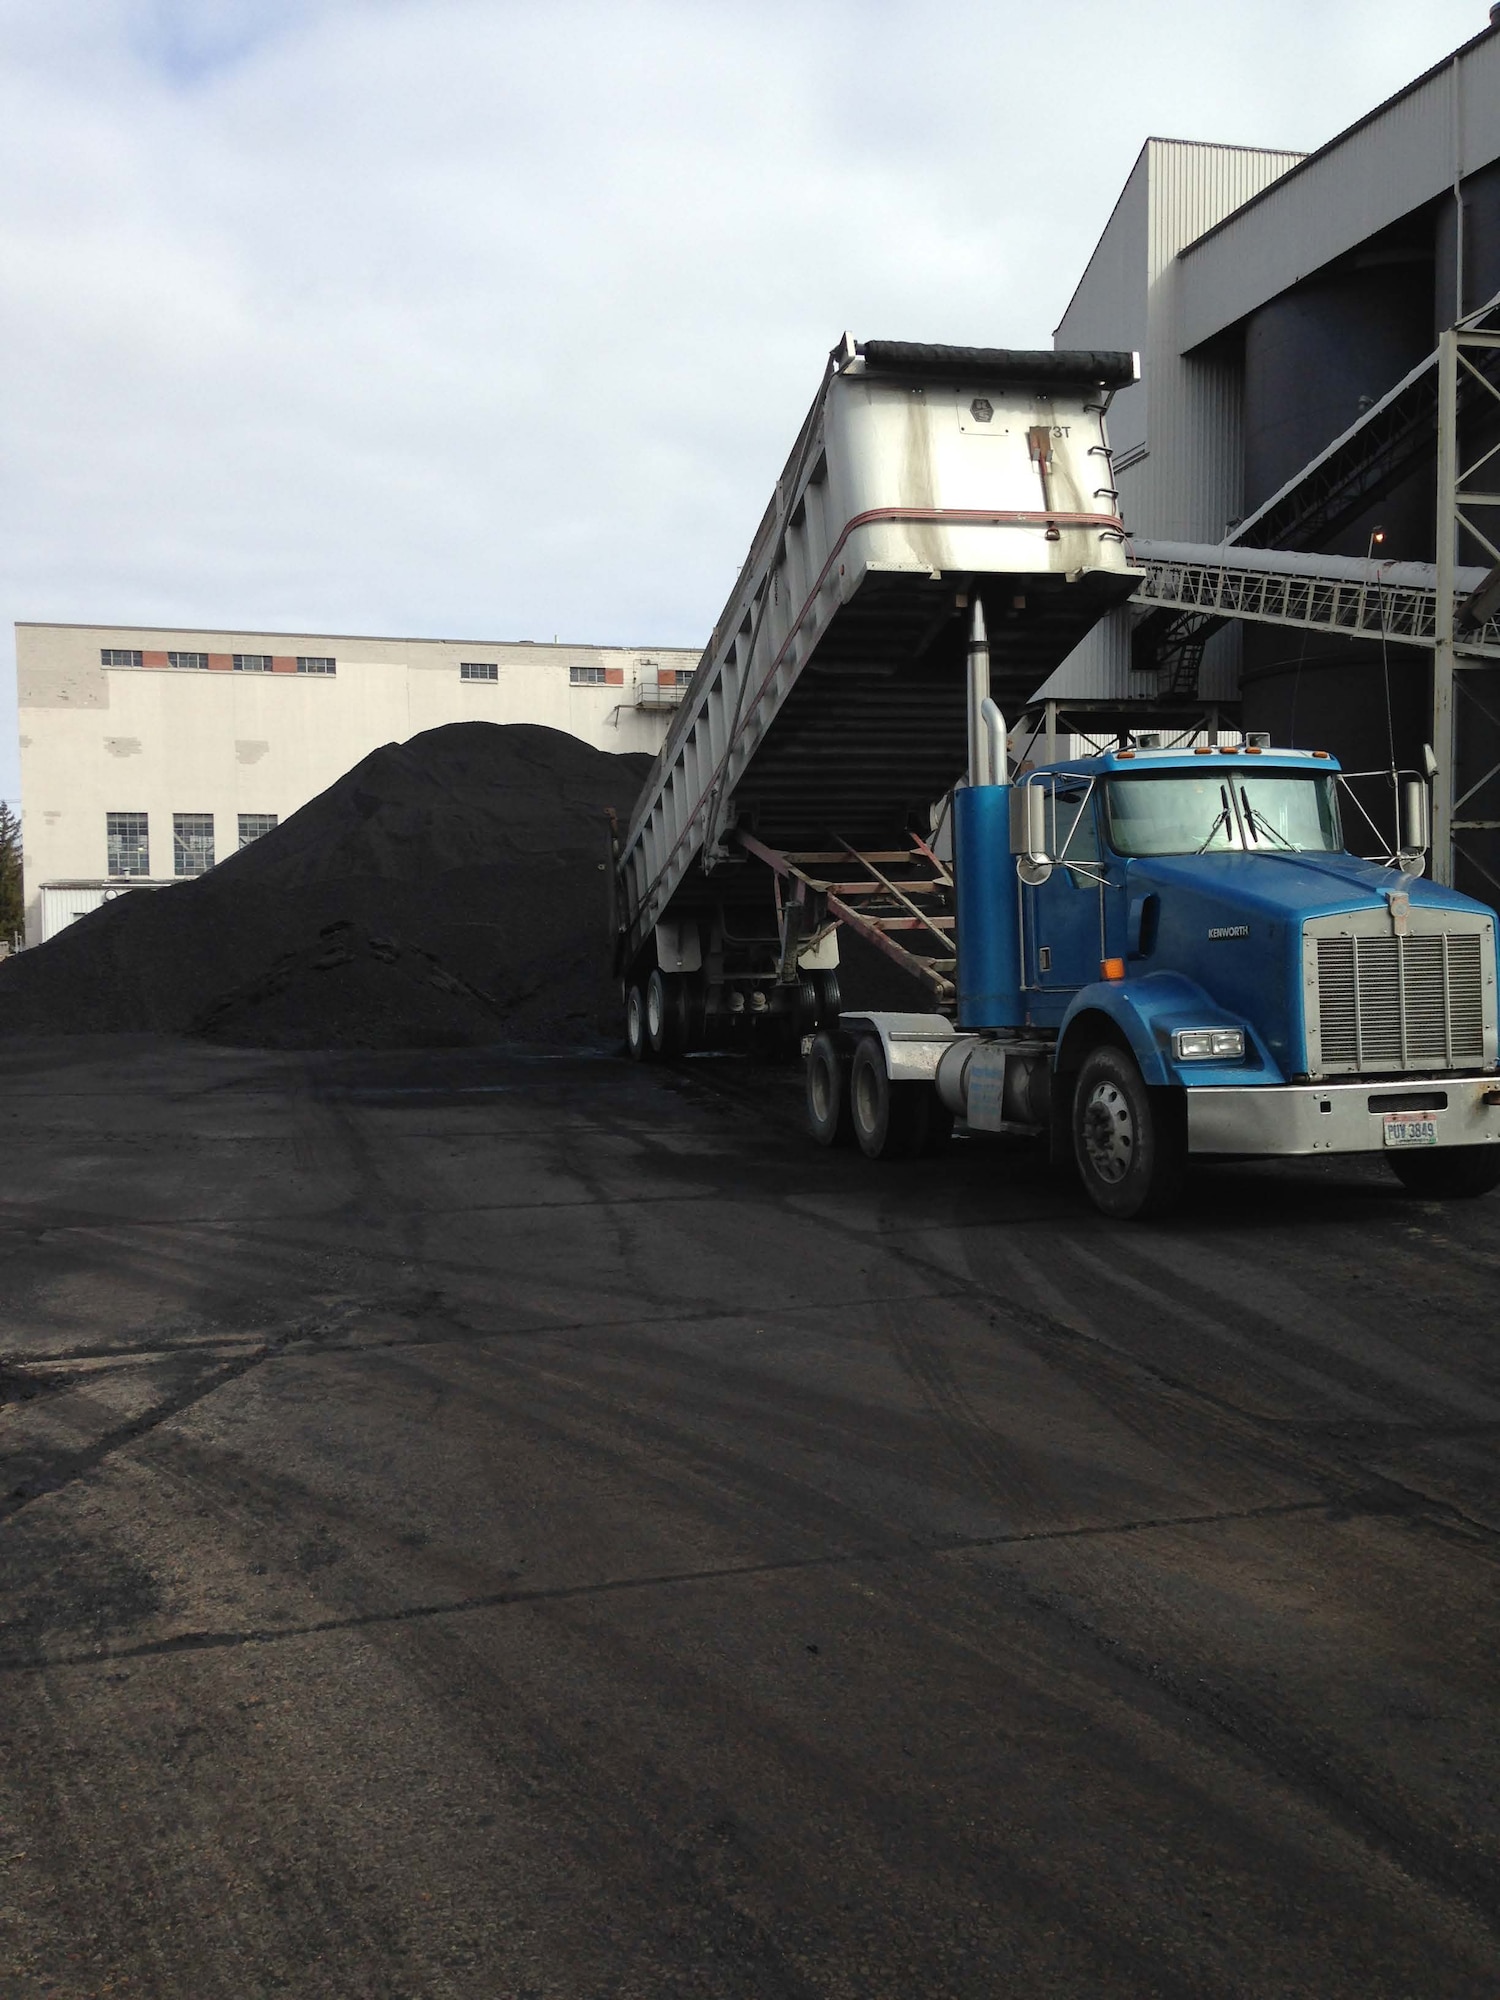 A truck delivers the very last load of coal at Wright-Patterson Air Force base. (U.S. Air Force photo / Ken Ferguson)